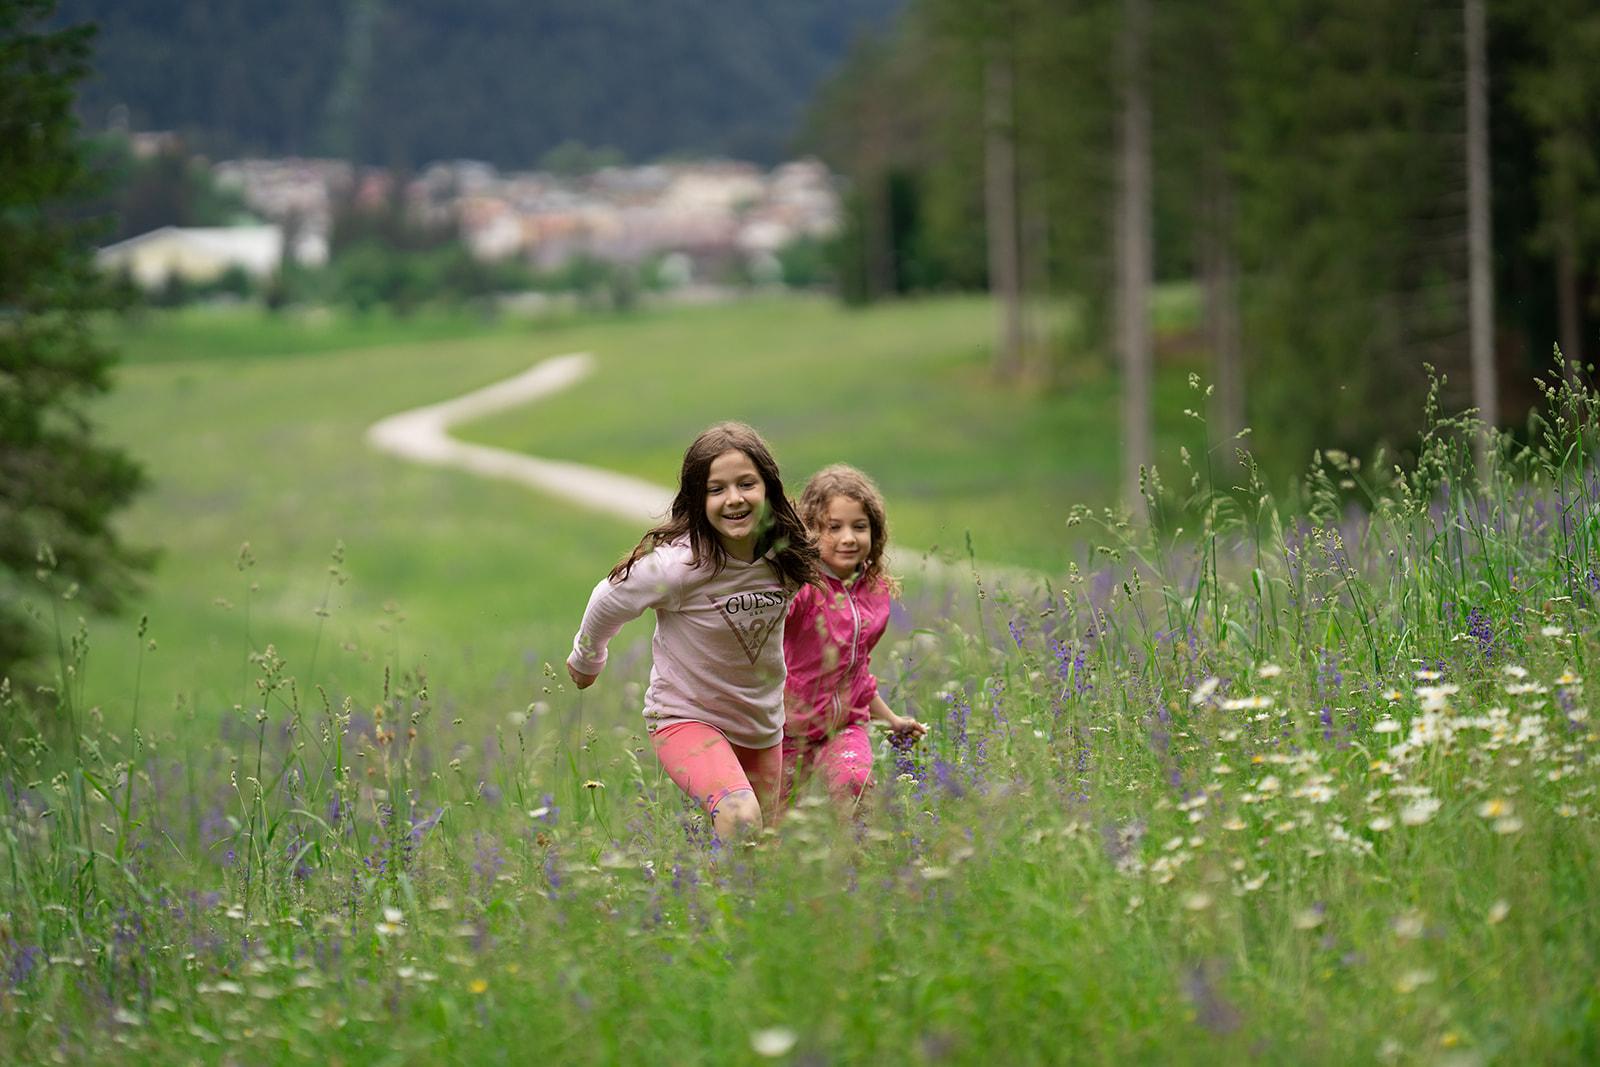 DOLOMITI PAGANELLA FAMILY FESTIVAL - the most eagerly awaited festival for families